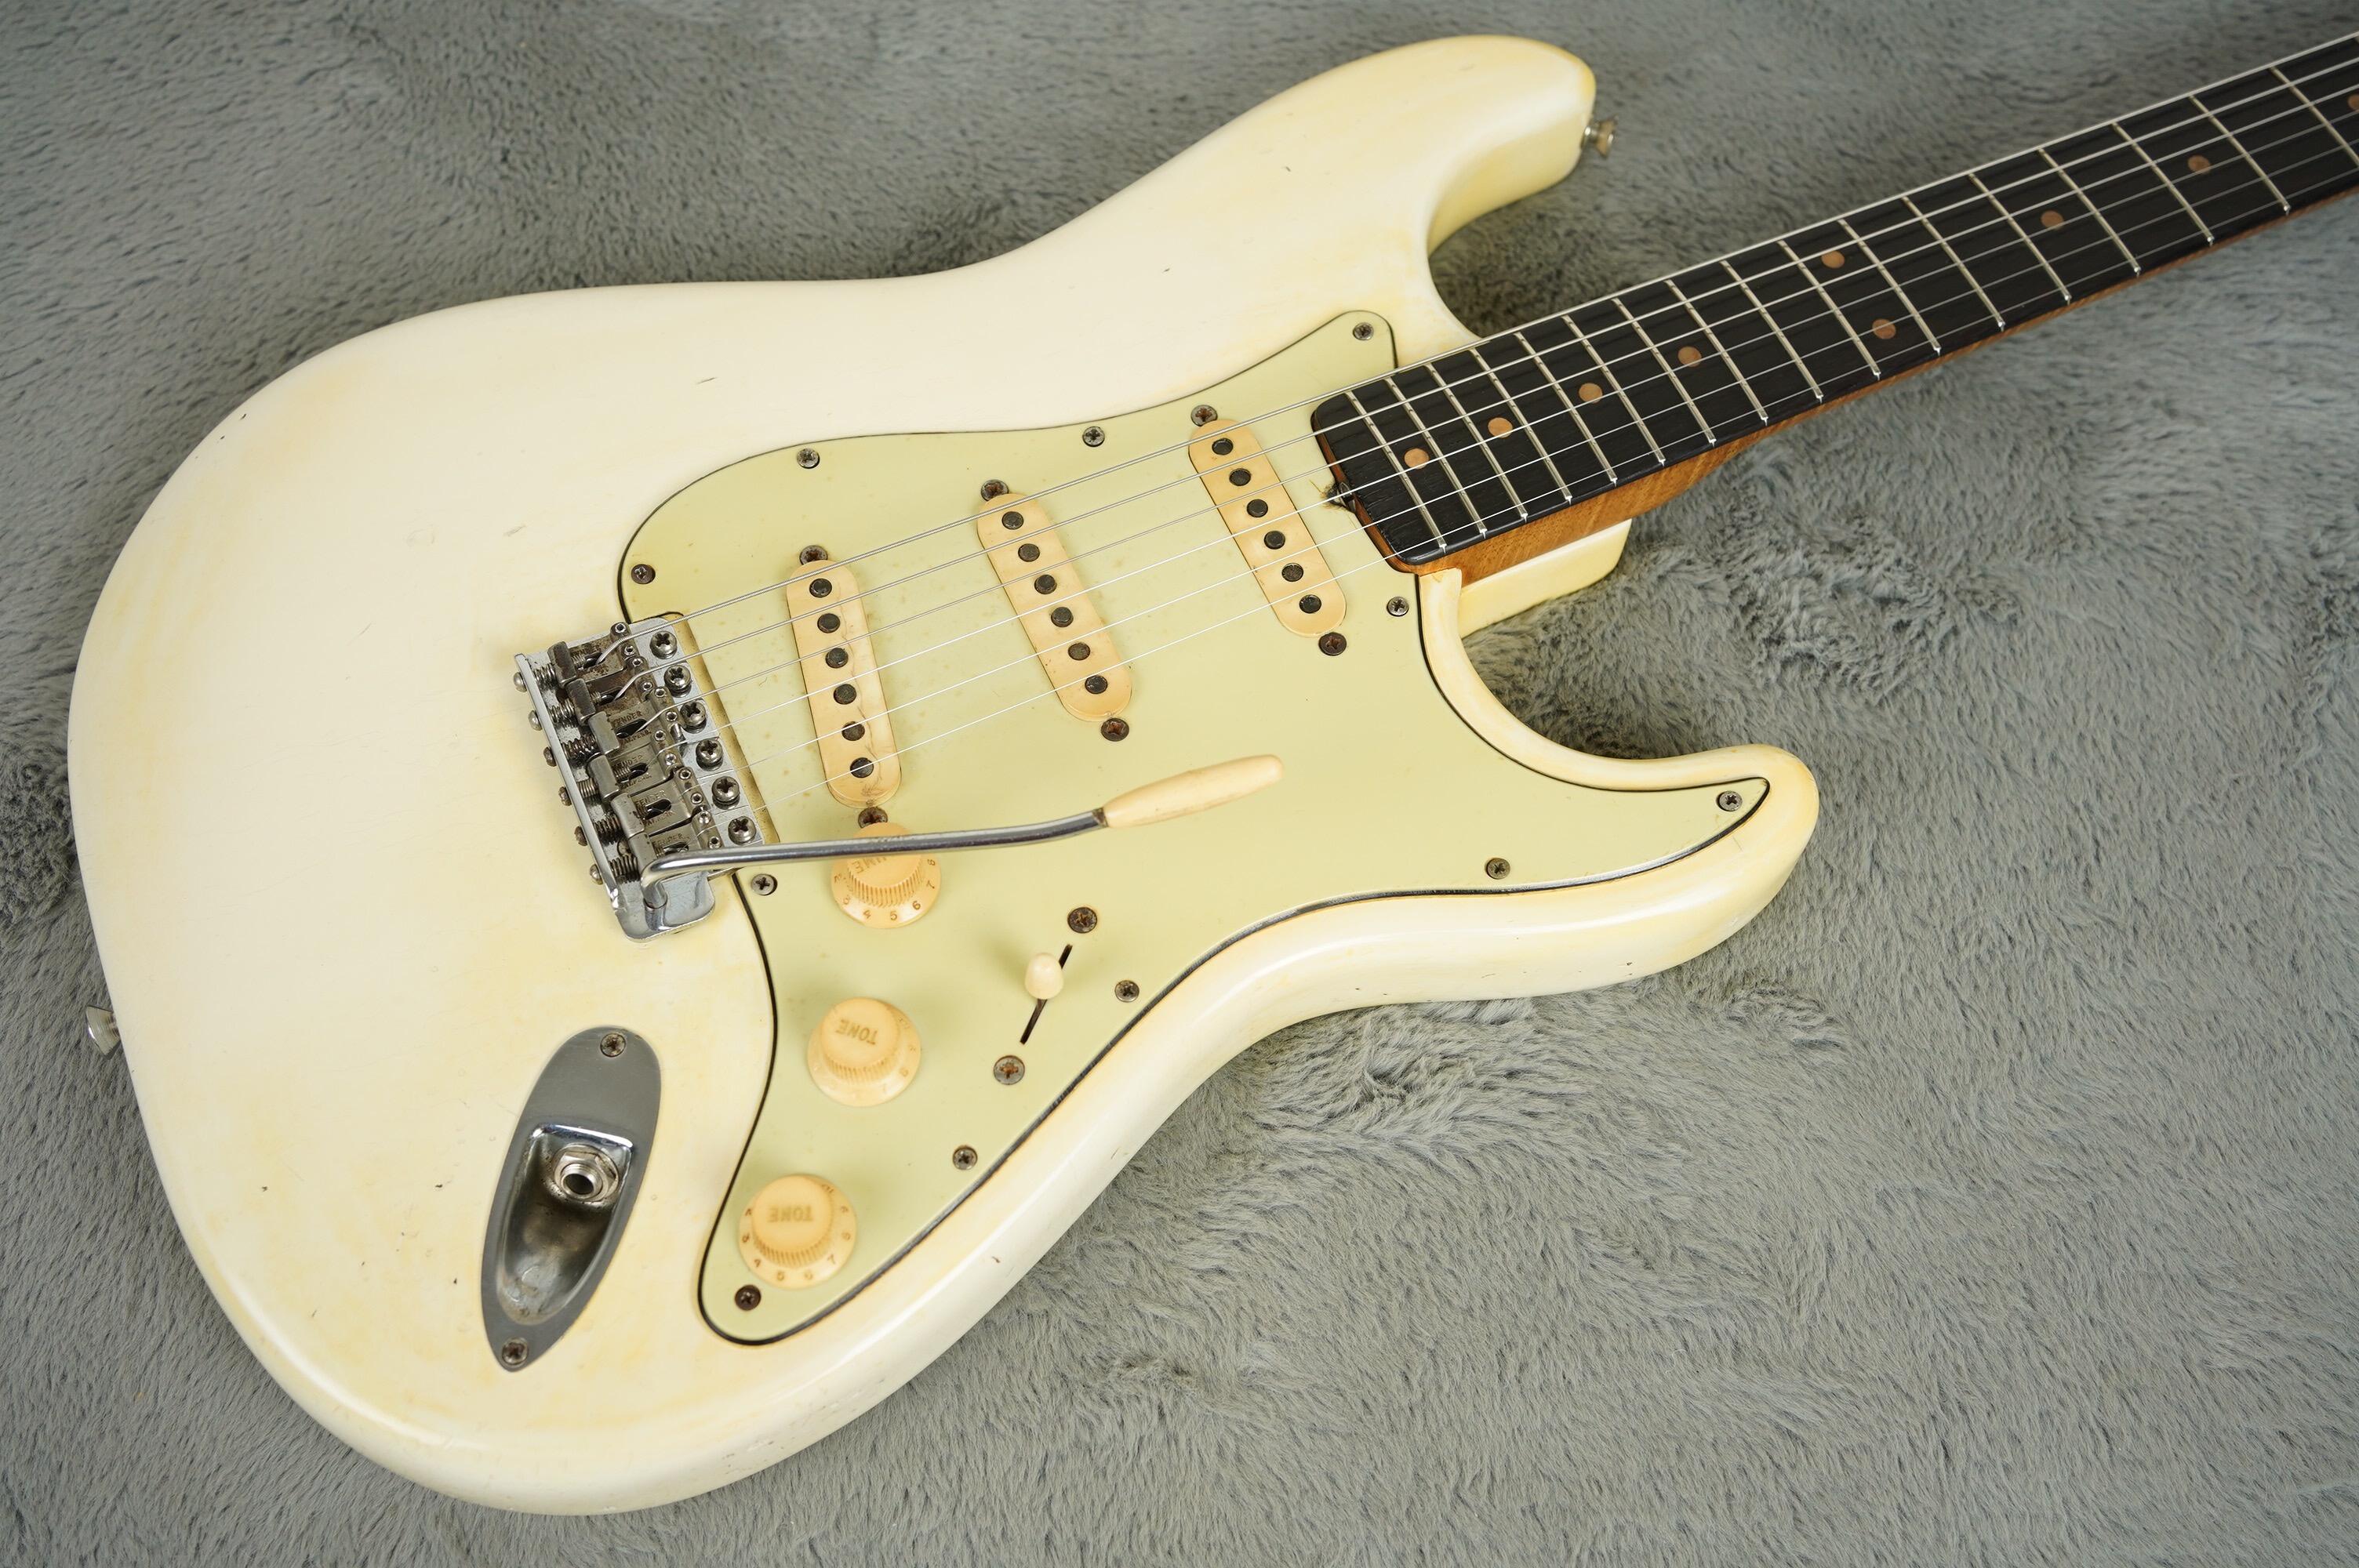 1963 Fender Stratocaster Olympic White refin flame neck